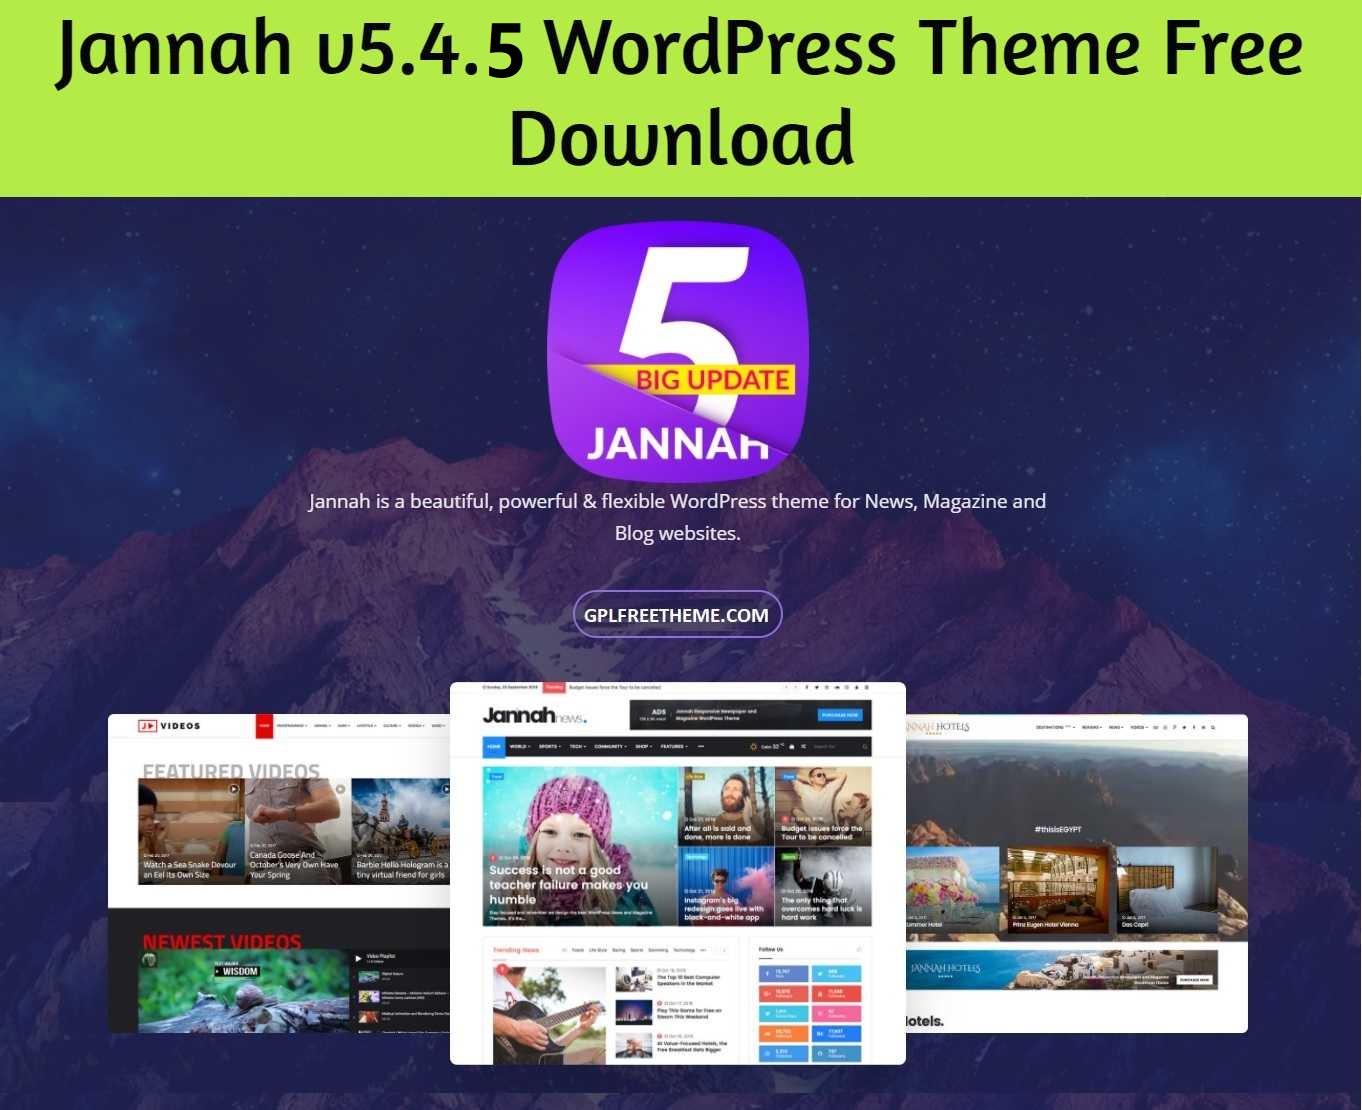 Jannah v5.4.5 WordPress Theme Free Download [Activated]